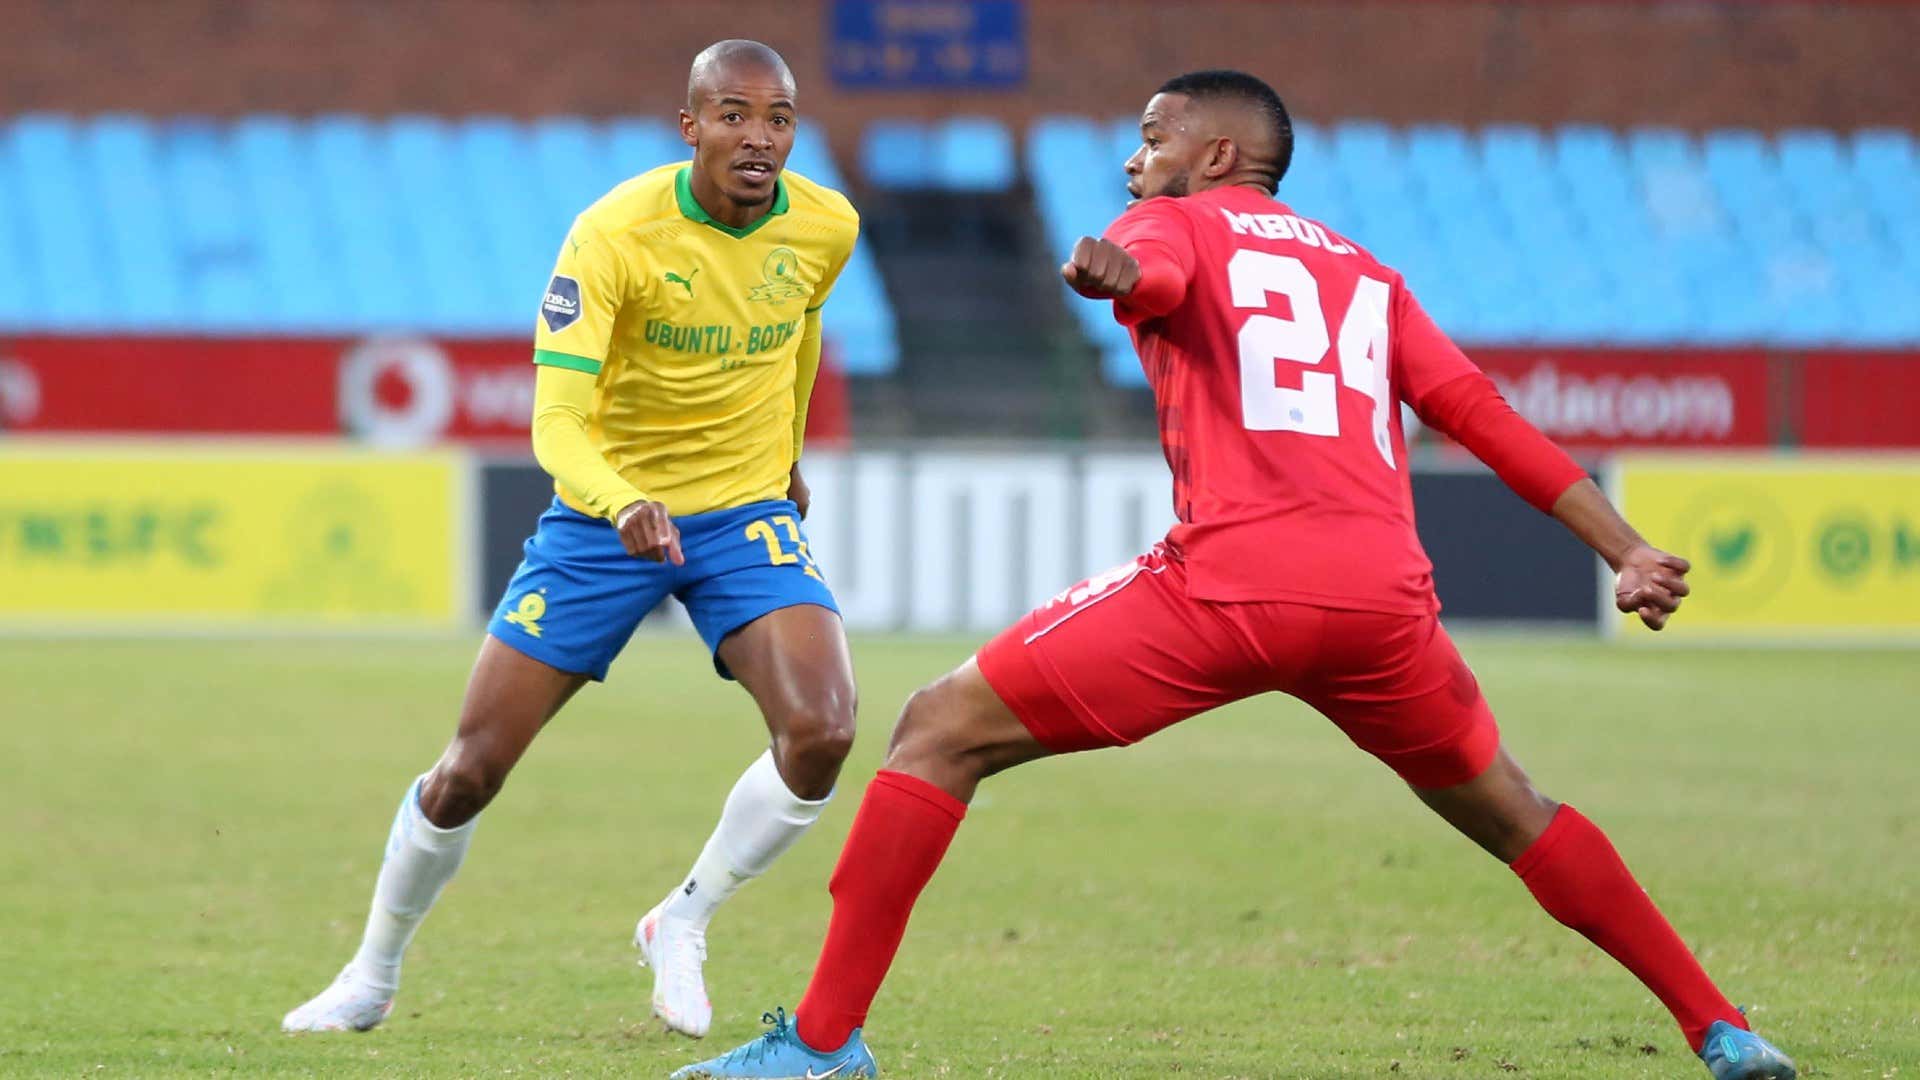 Thapelo Morena of Mamelodi Sundowns challenged by Sipho Mbule of Supersport United.